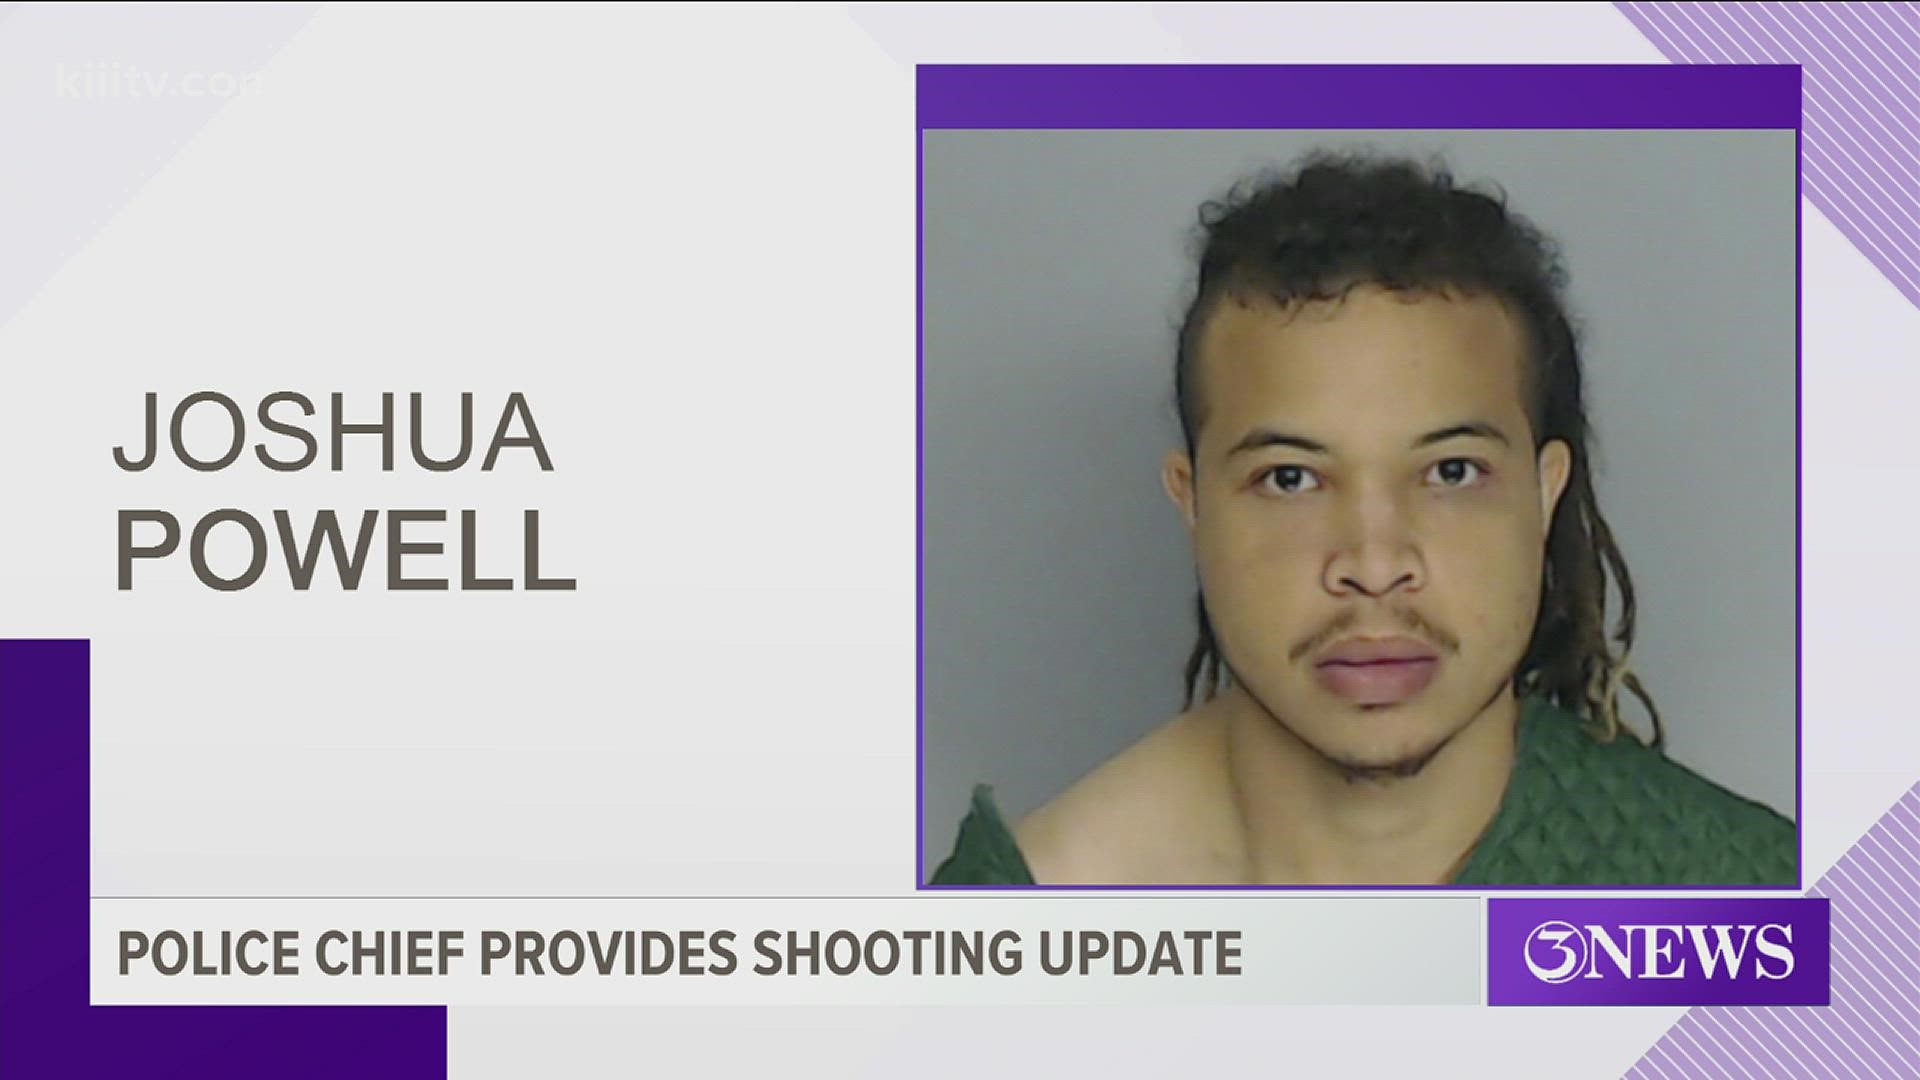 20-year-old Joshua Powell is facing a charge of attempted capital murder in lieu of a $1 million bond after allegedly shooting Senior Officer Manuel Dominguez.